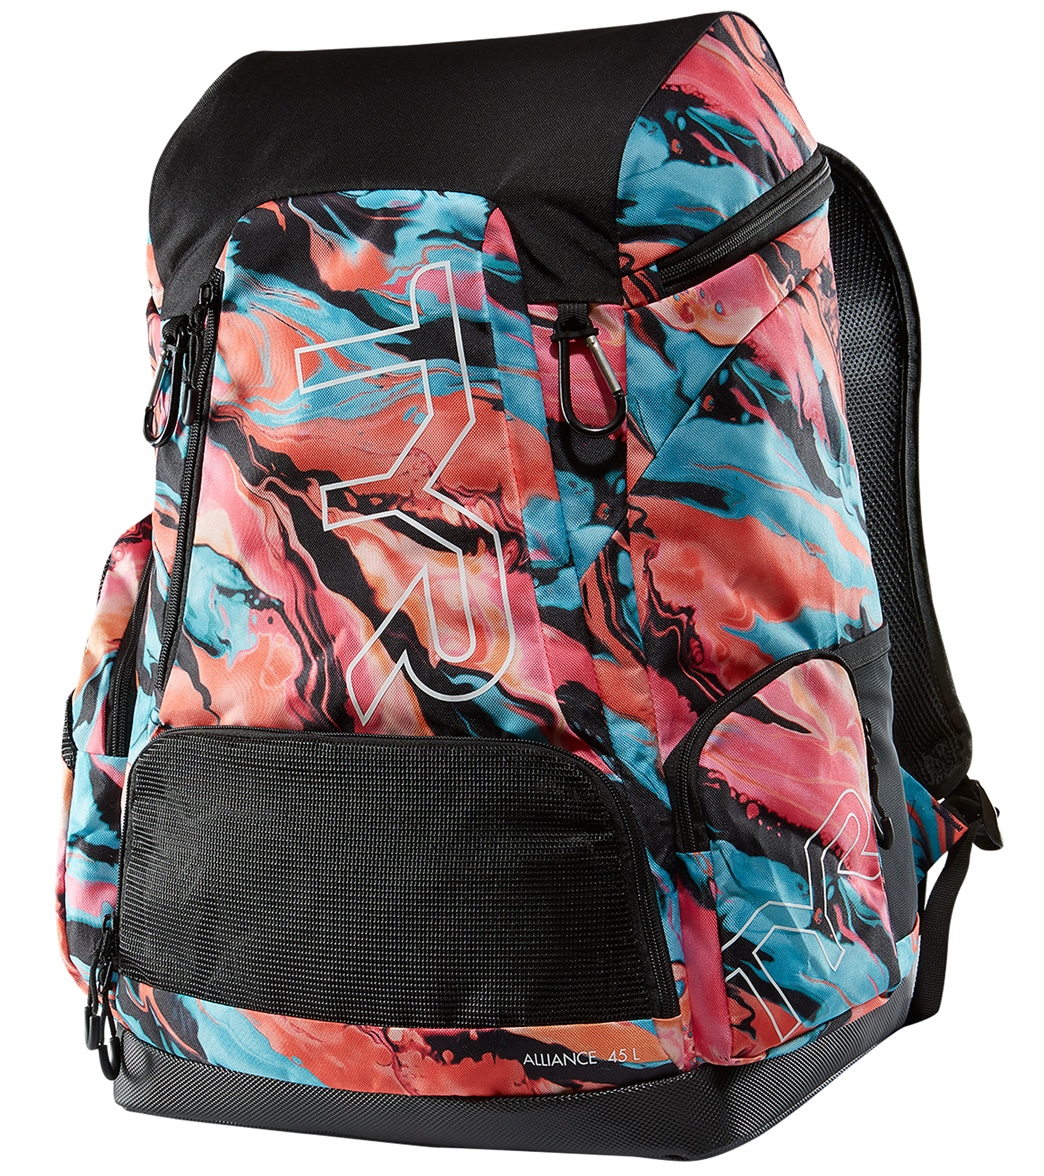 TYR Alliance 45L Soulful Backpack - Multi - Swimoutlet.com